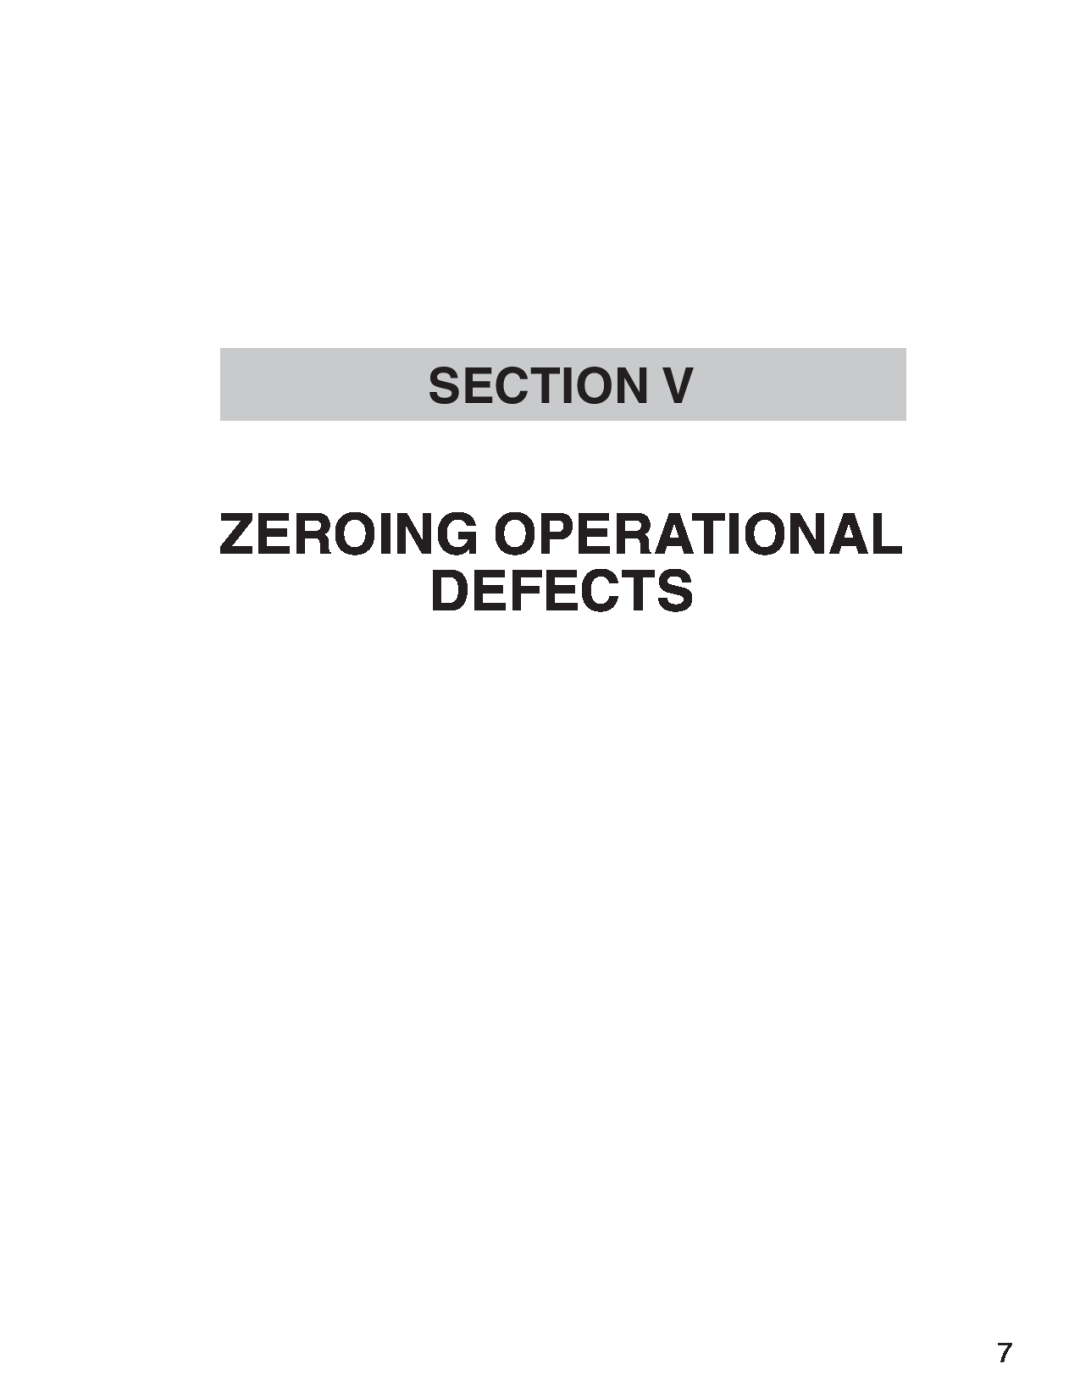 ATN 3 manual Zeroing Operational Defects, Section 